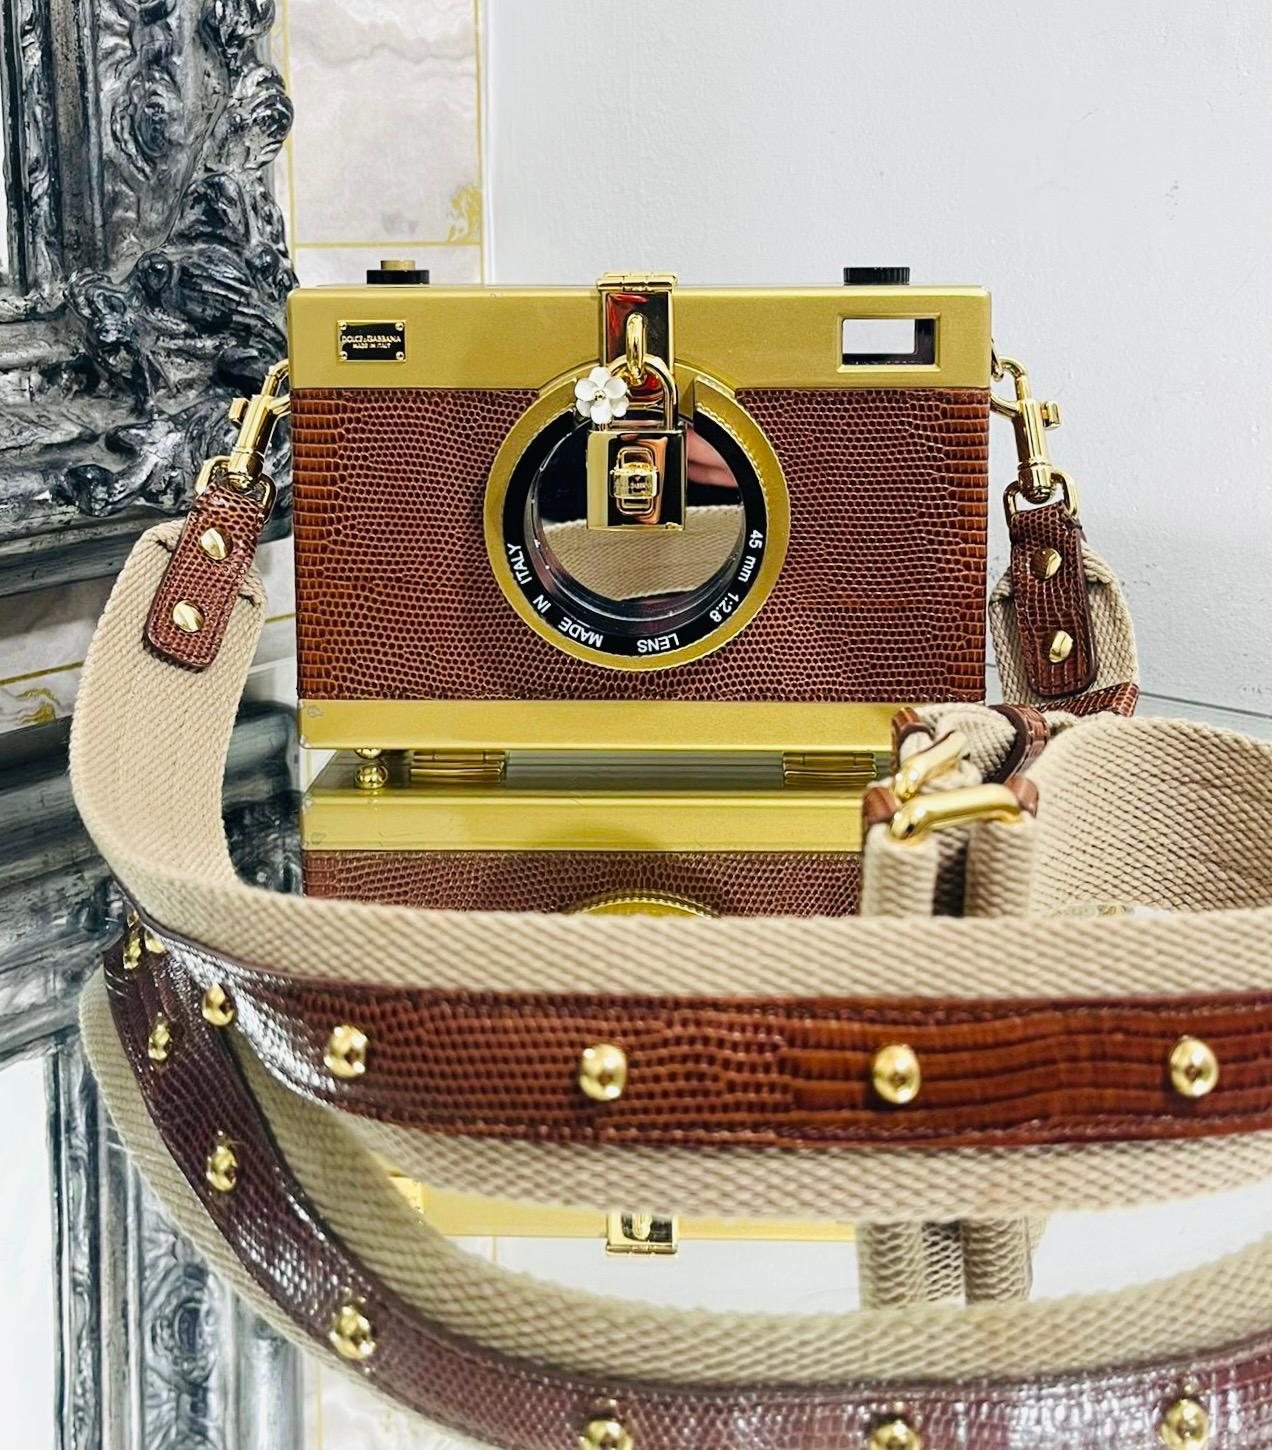 Rare Piece - Dolce & Gabbana Lizard Skin Camera Bag

Brown shoulder bag crafted  from exotic leather in a shape of a camera and designed with gold tone details and mirrored camera lens.

Having gold padlock attached embellished with white